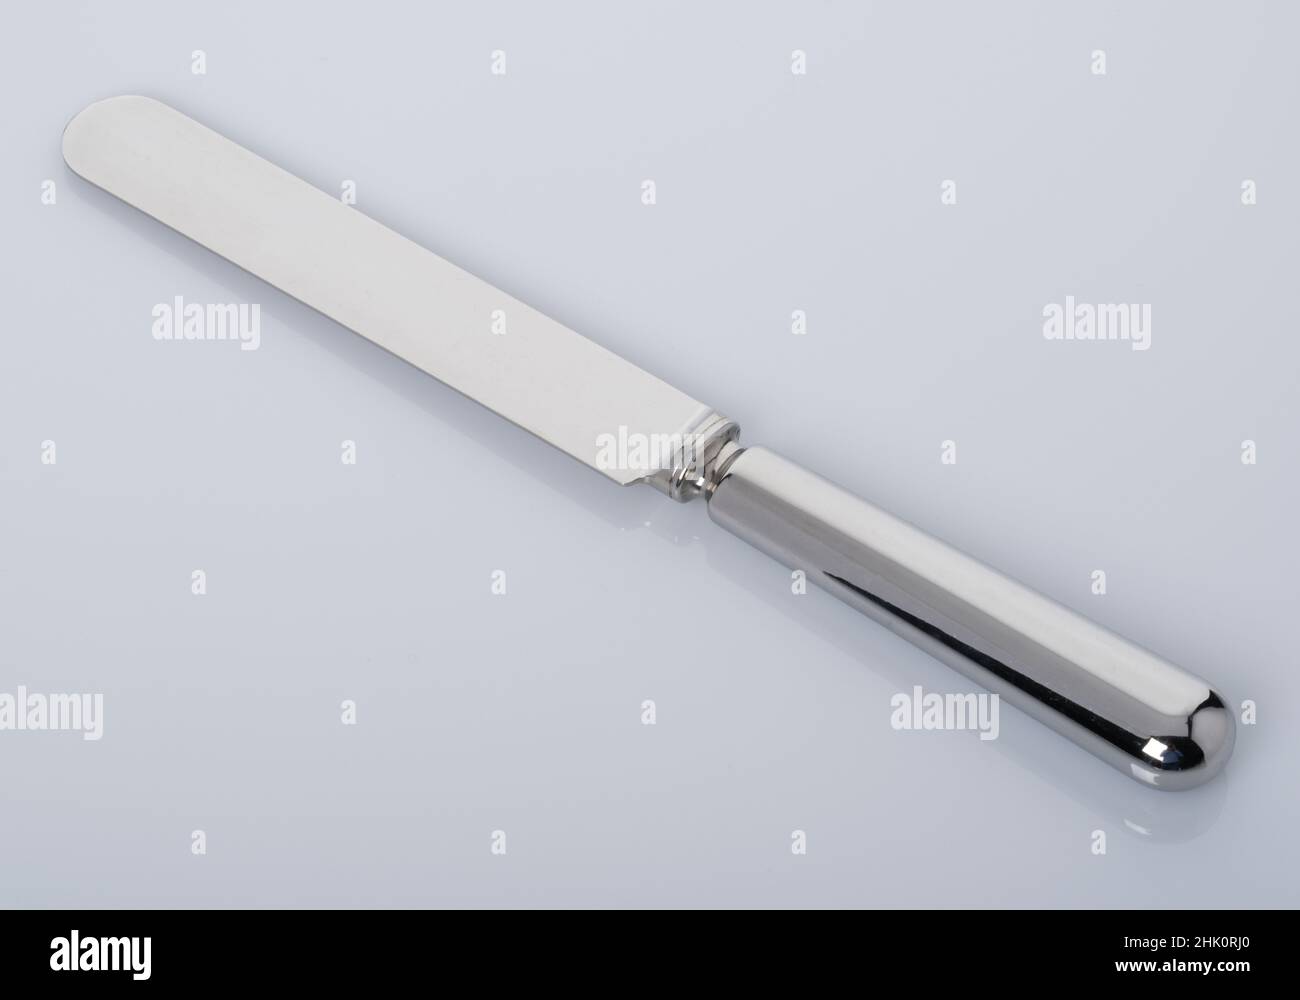 A table knife. Silver plated knife. Stock Photo